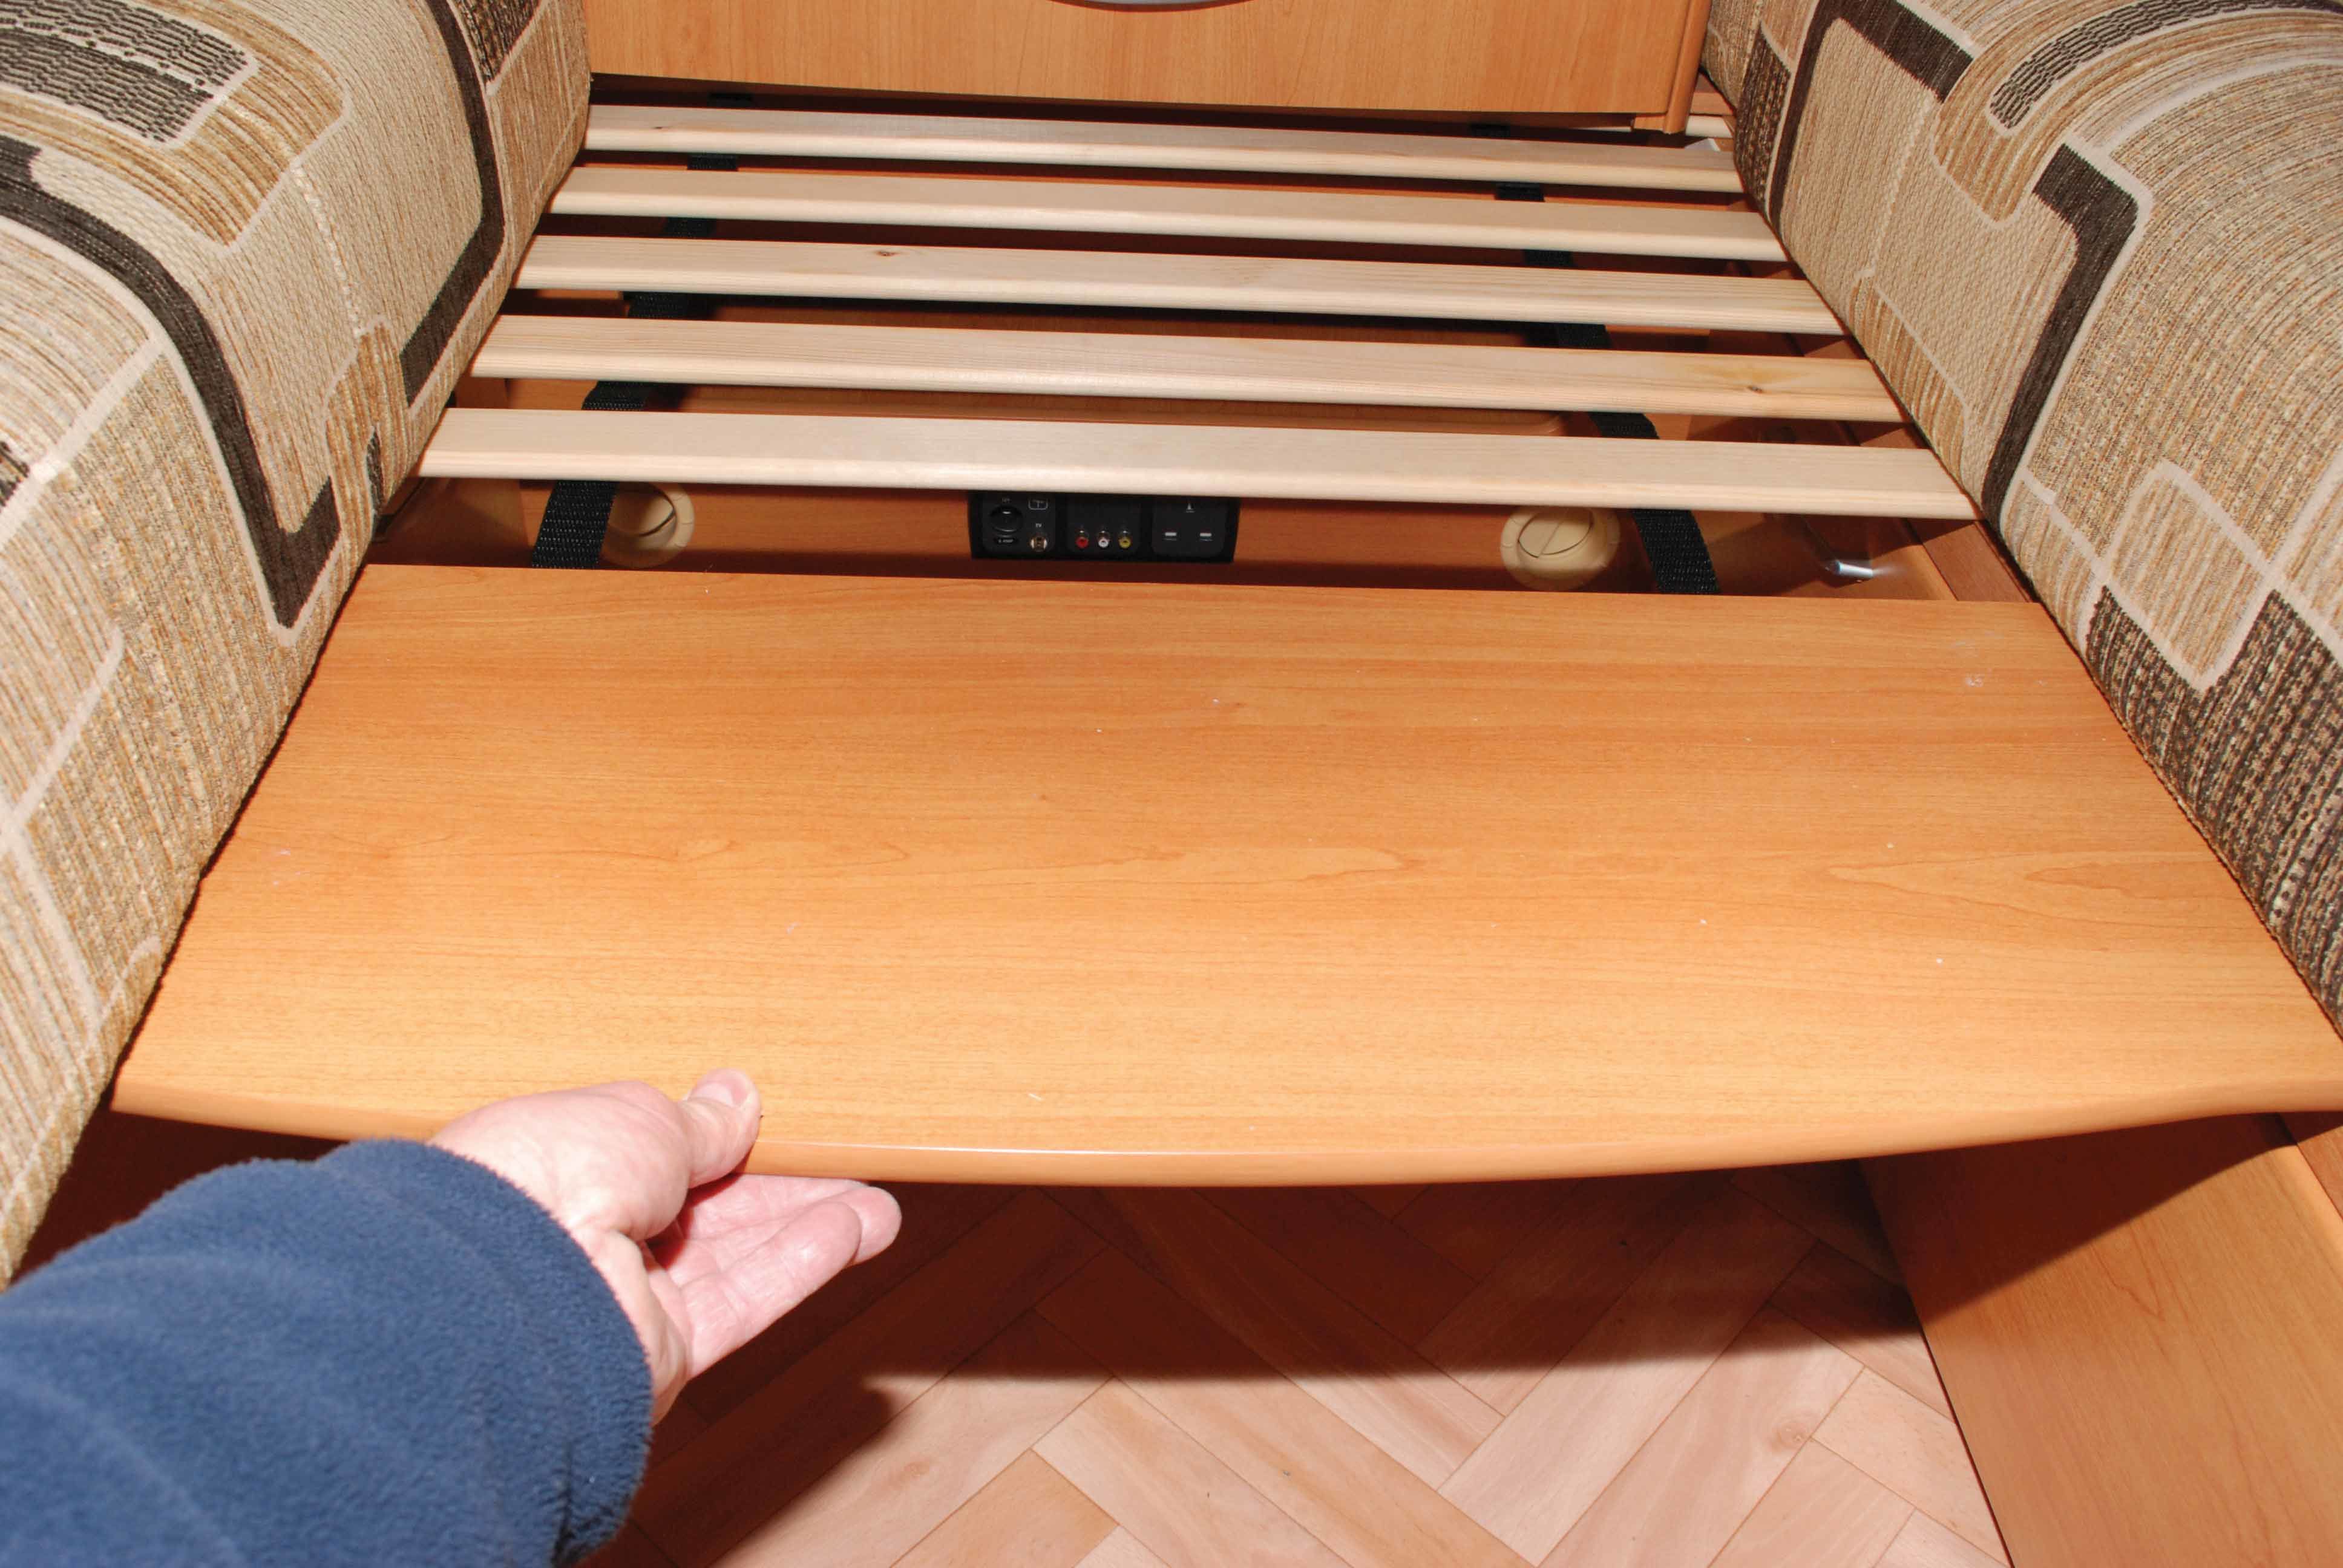 Inspect and try out as much of the equipment as possible, such as these bed slats.